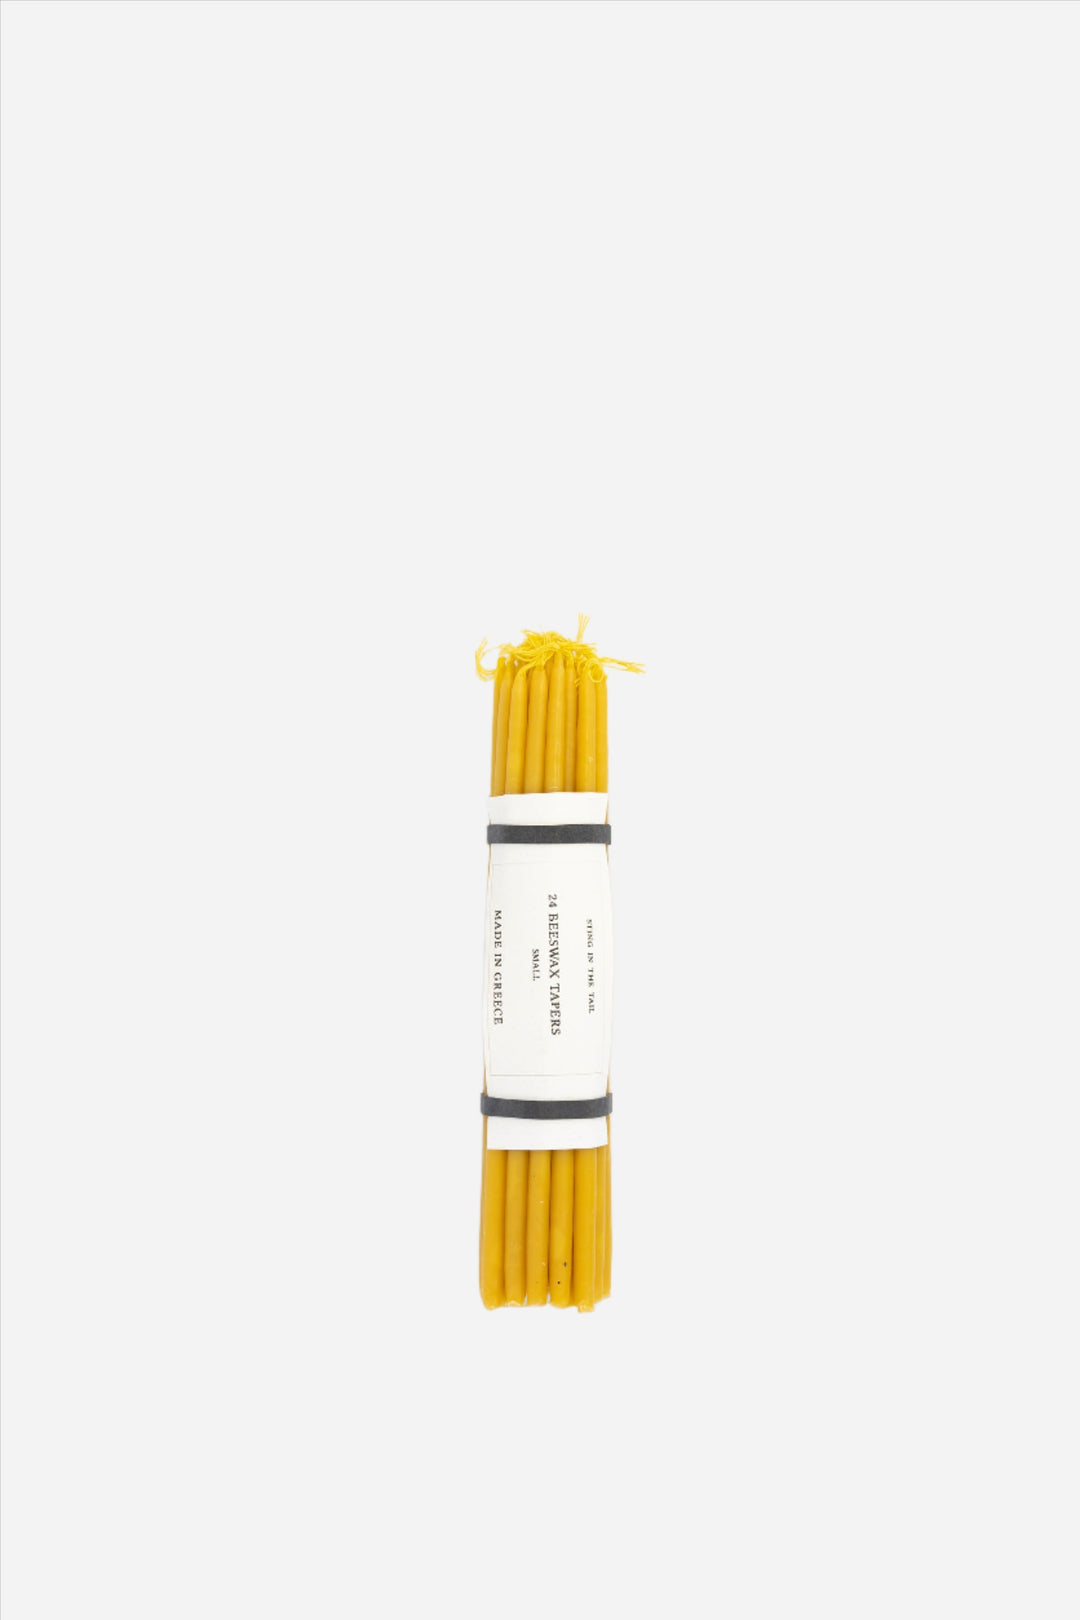 Beeswax Candle Tapers - Domestic Science Home